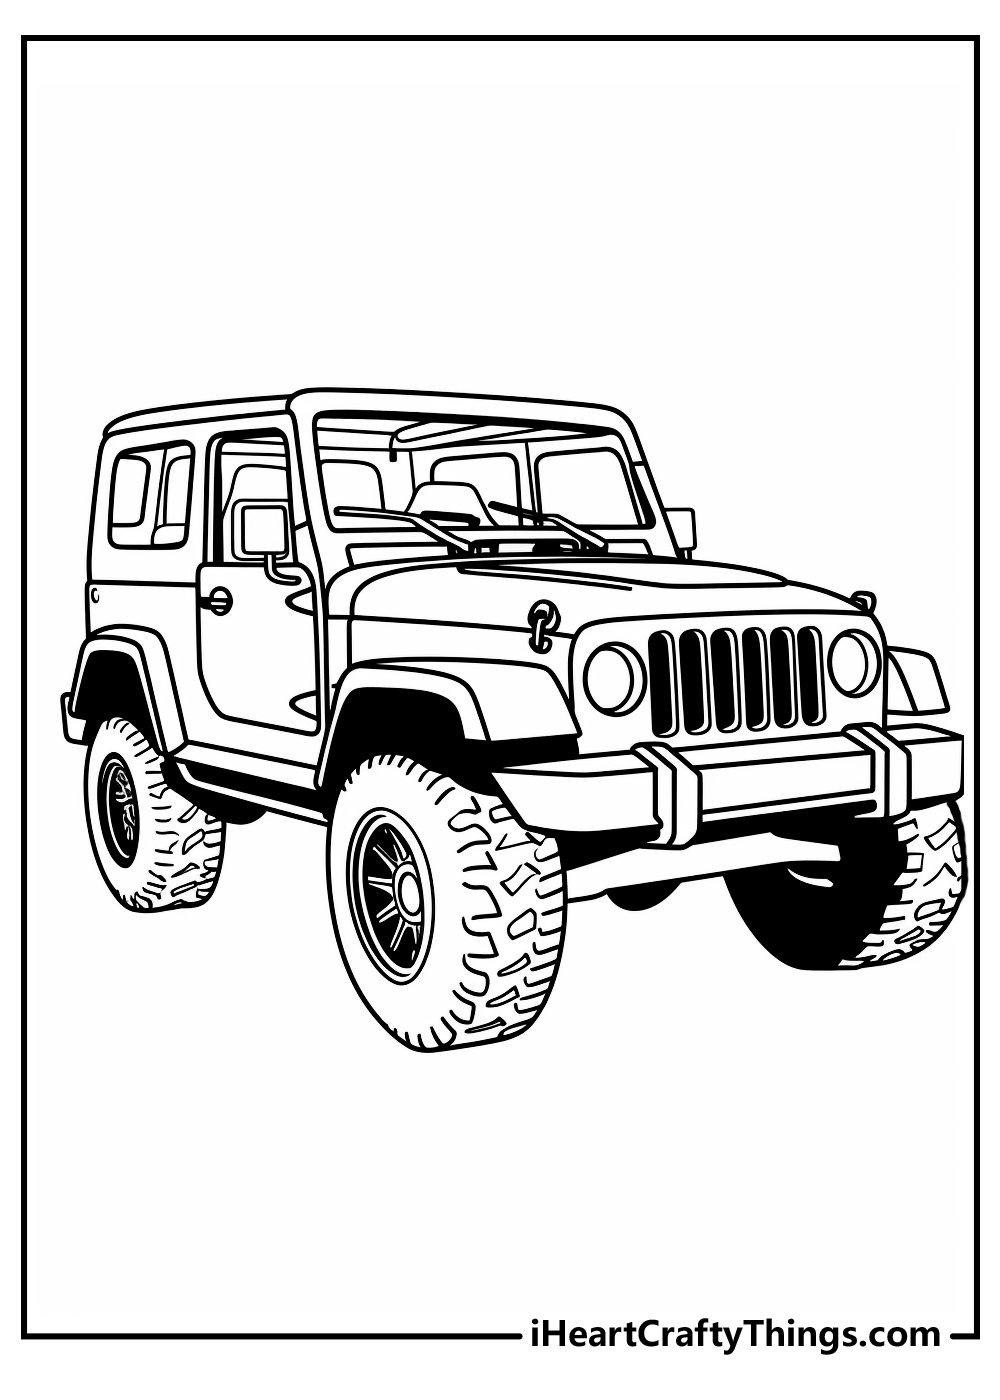 Jeep coloring pages free printables